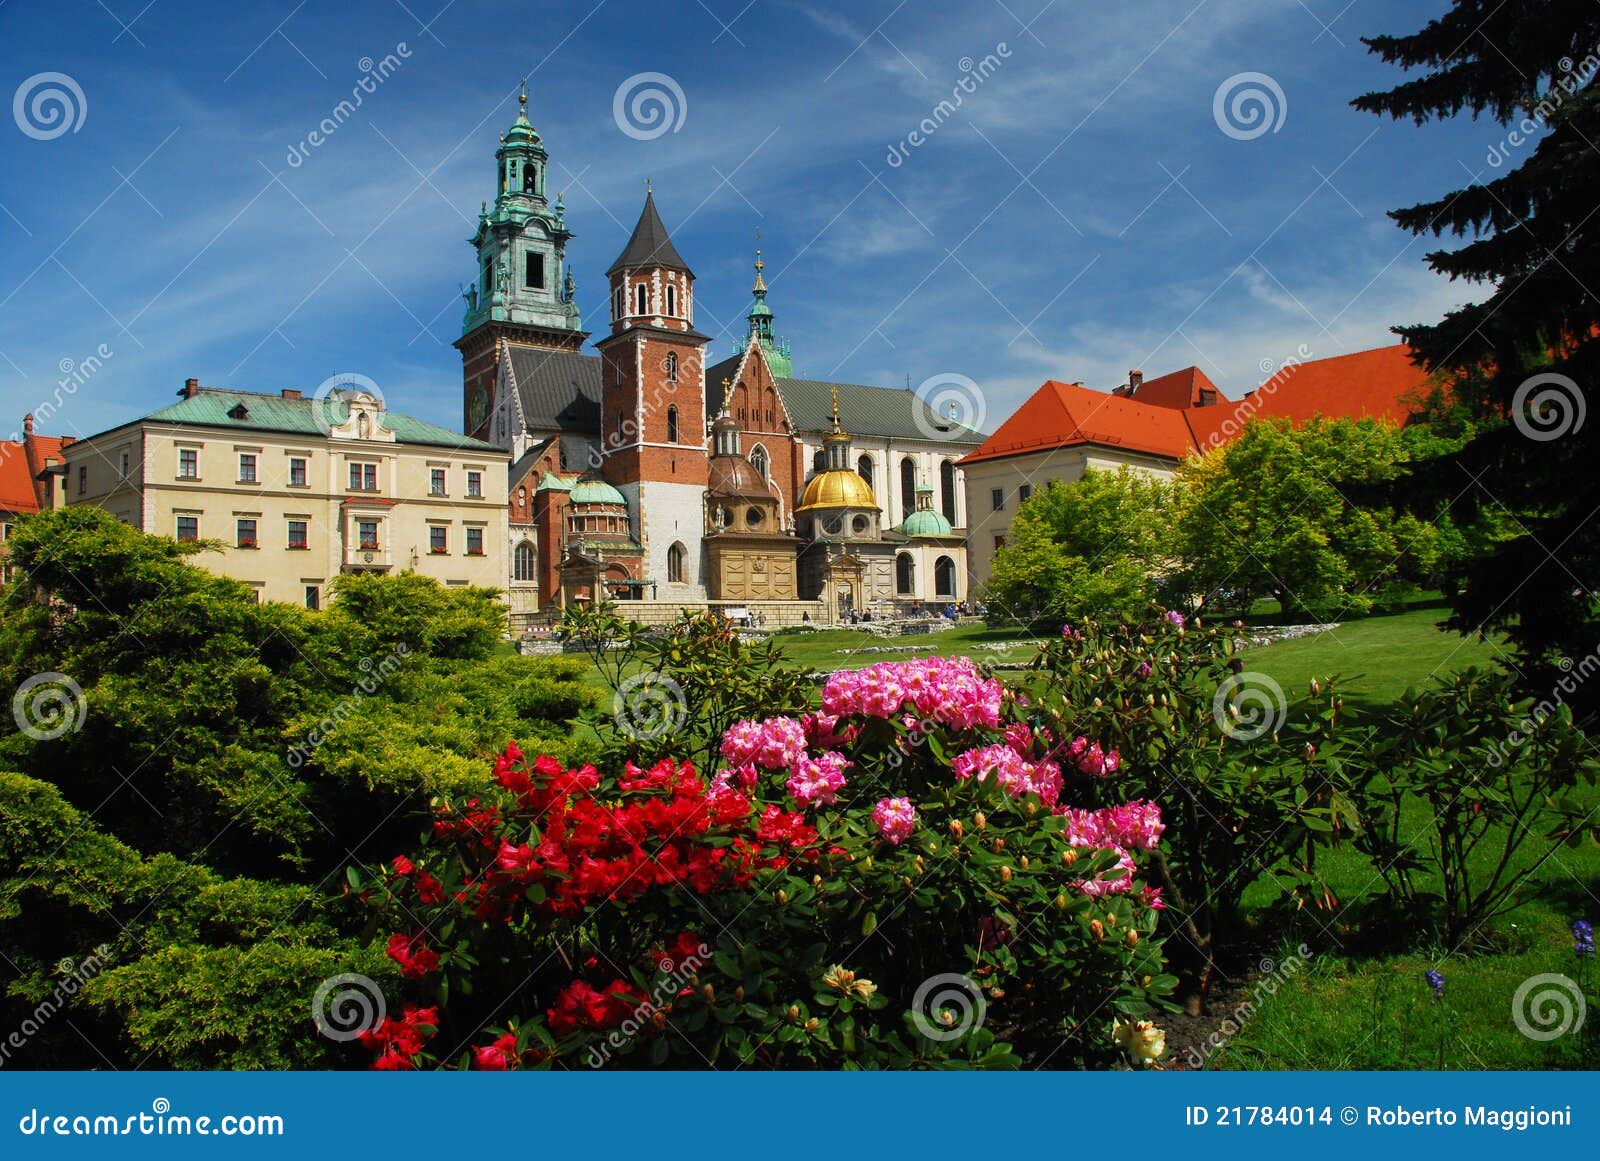 krakow, poland. wawel cathedral and castle